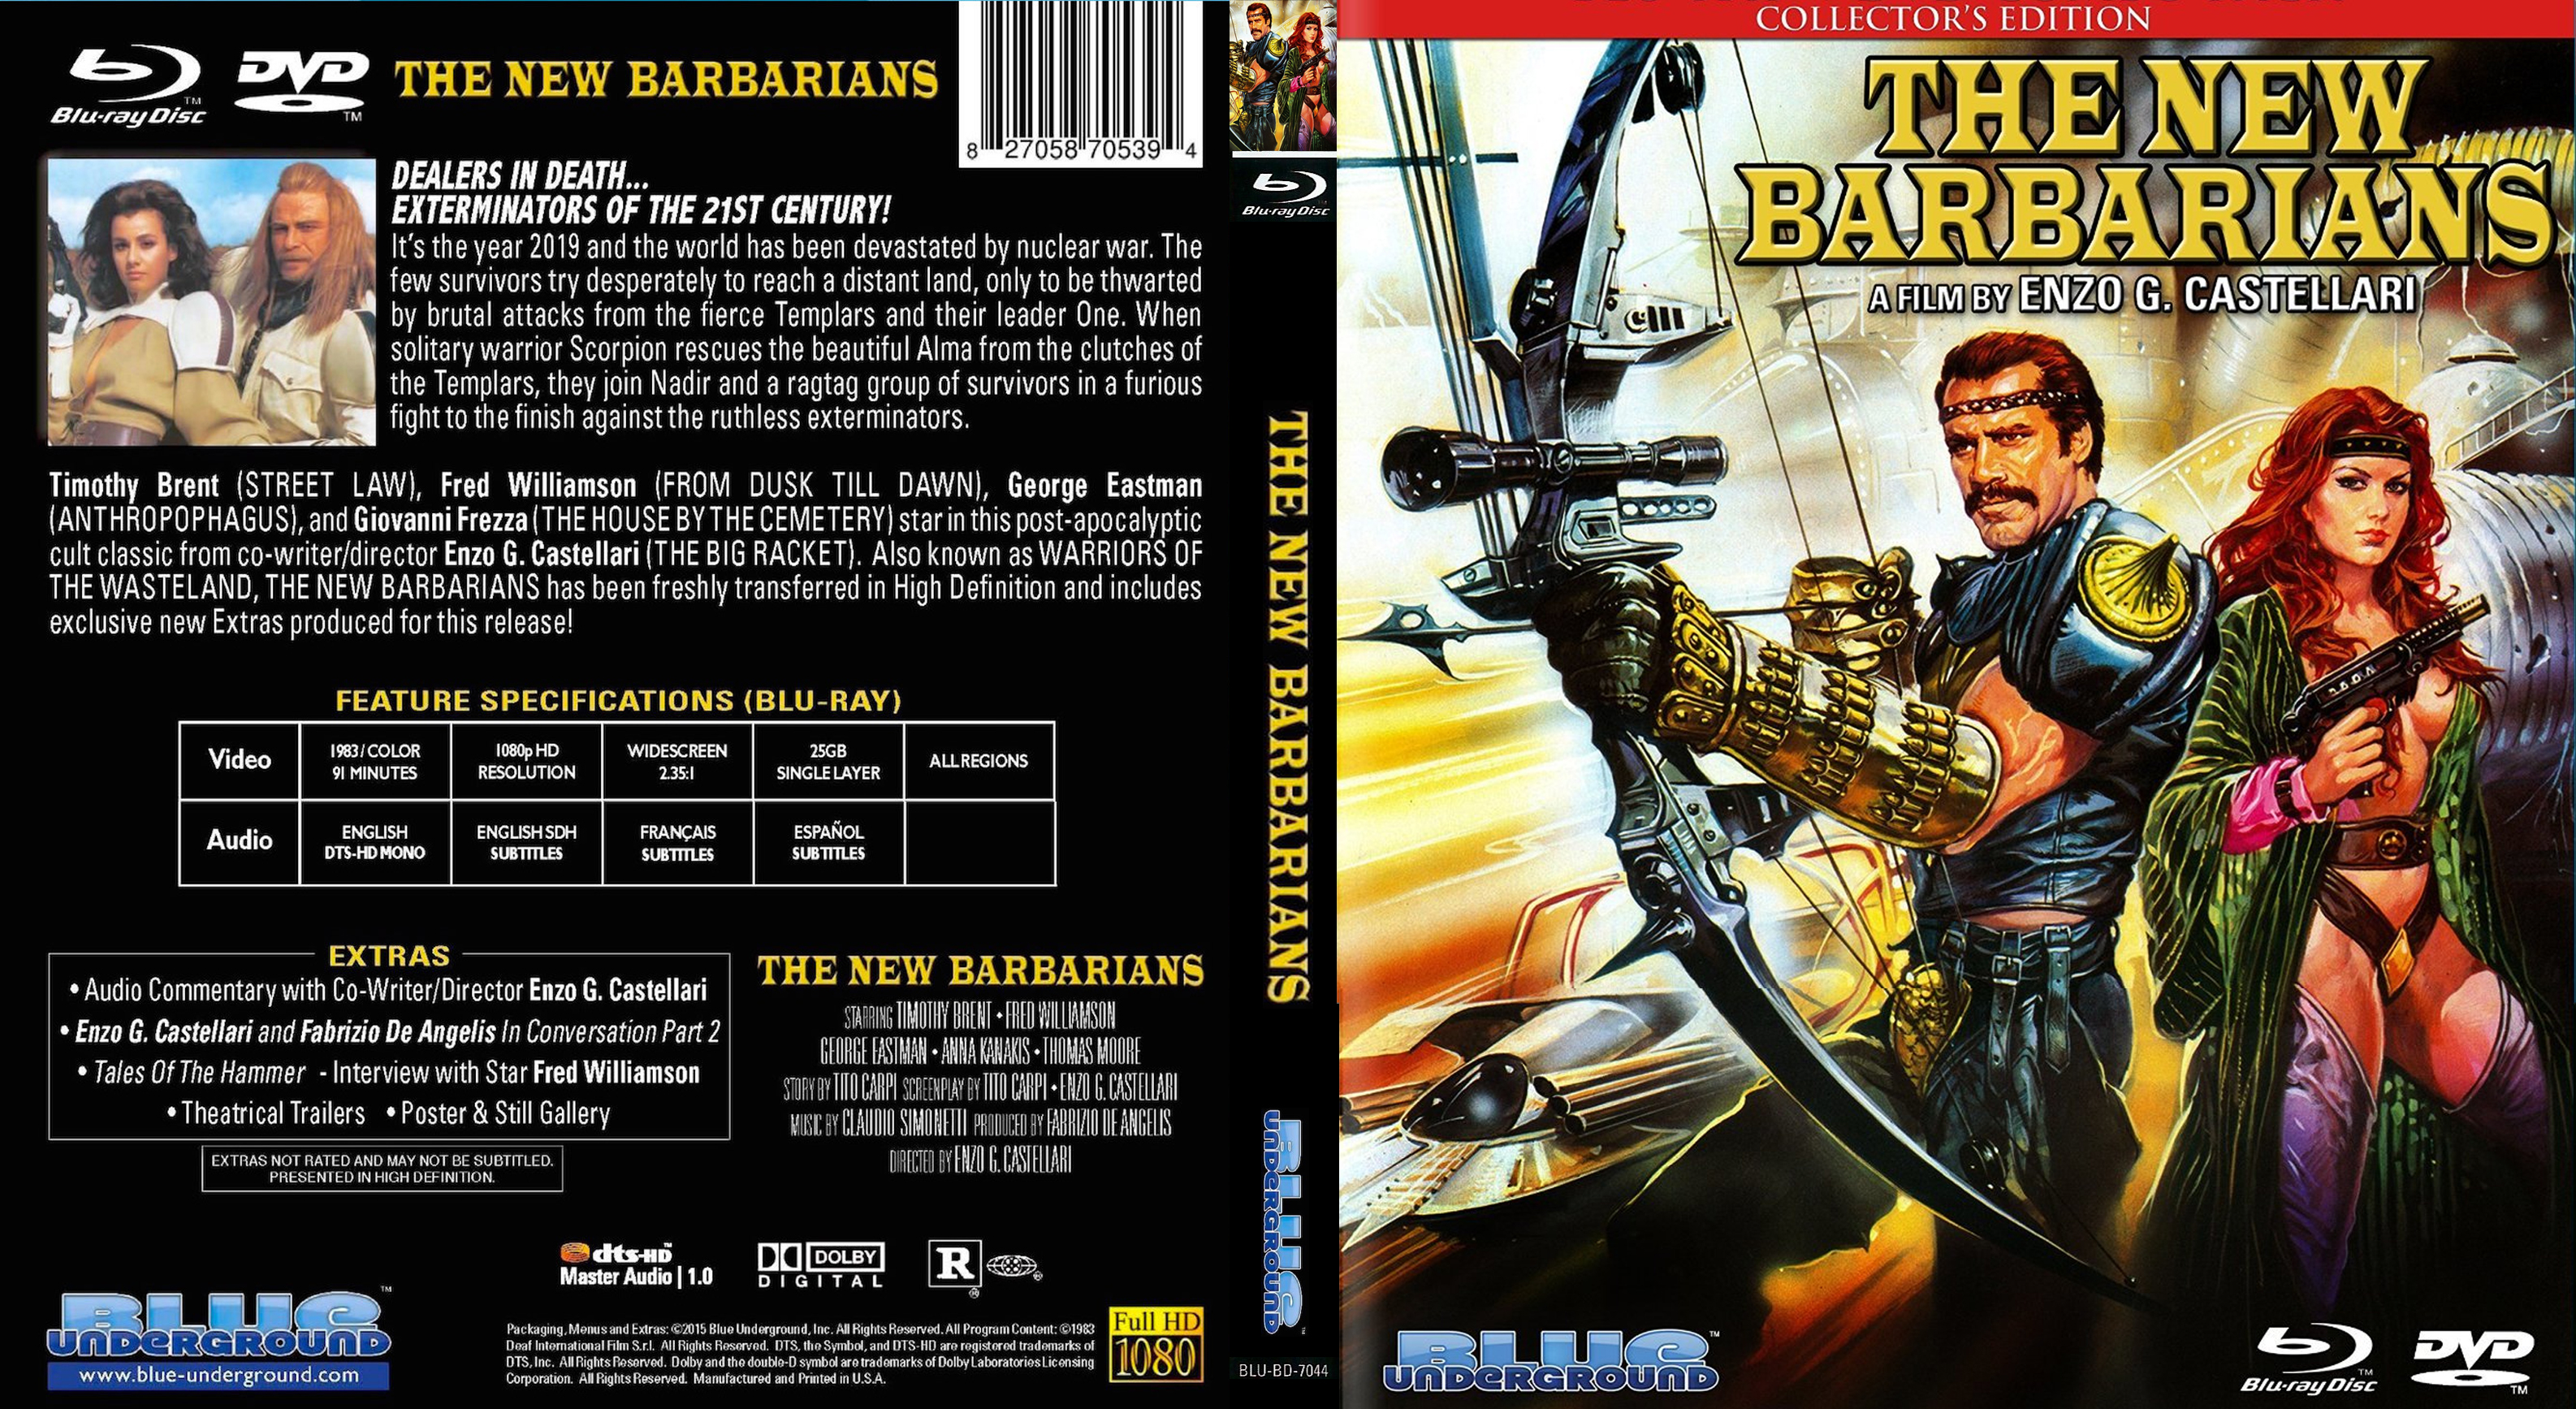 Jaquette DVD The new barbarians Zone 1